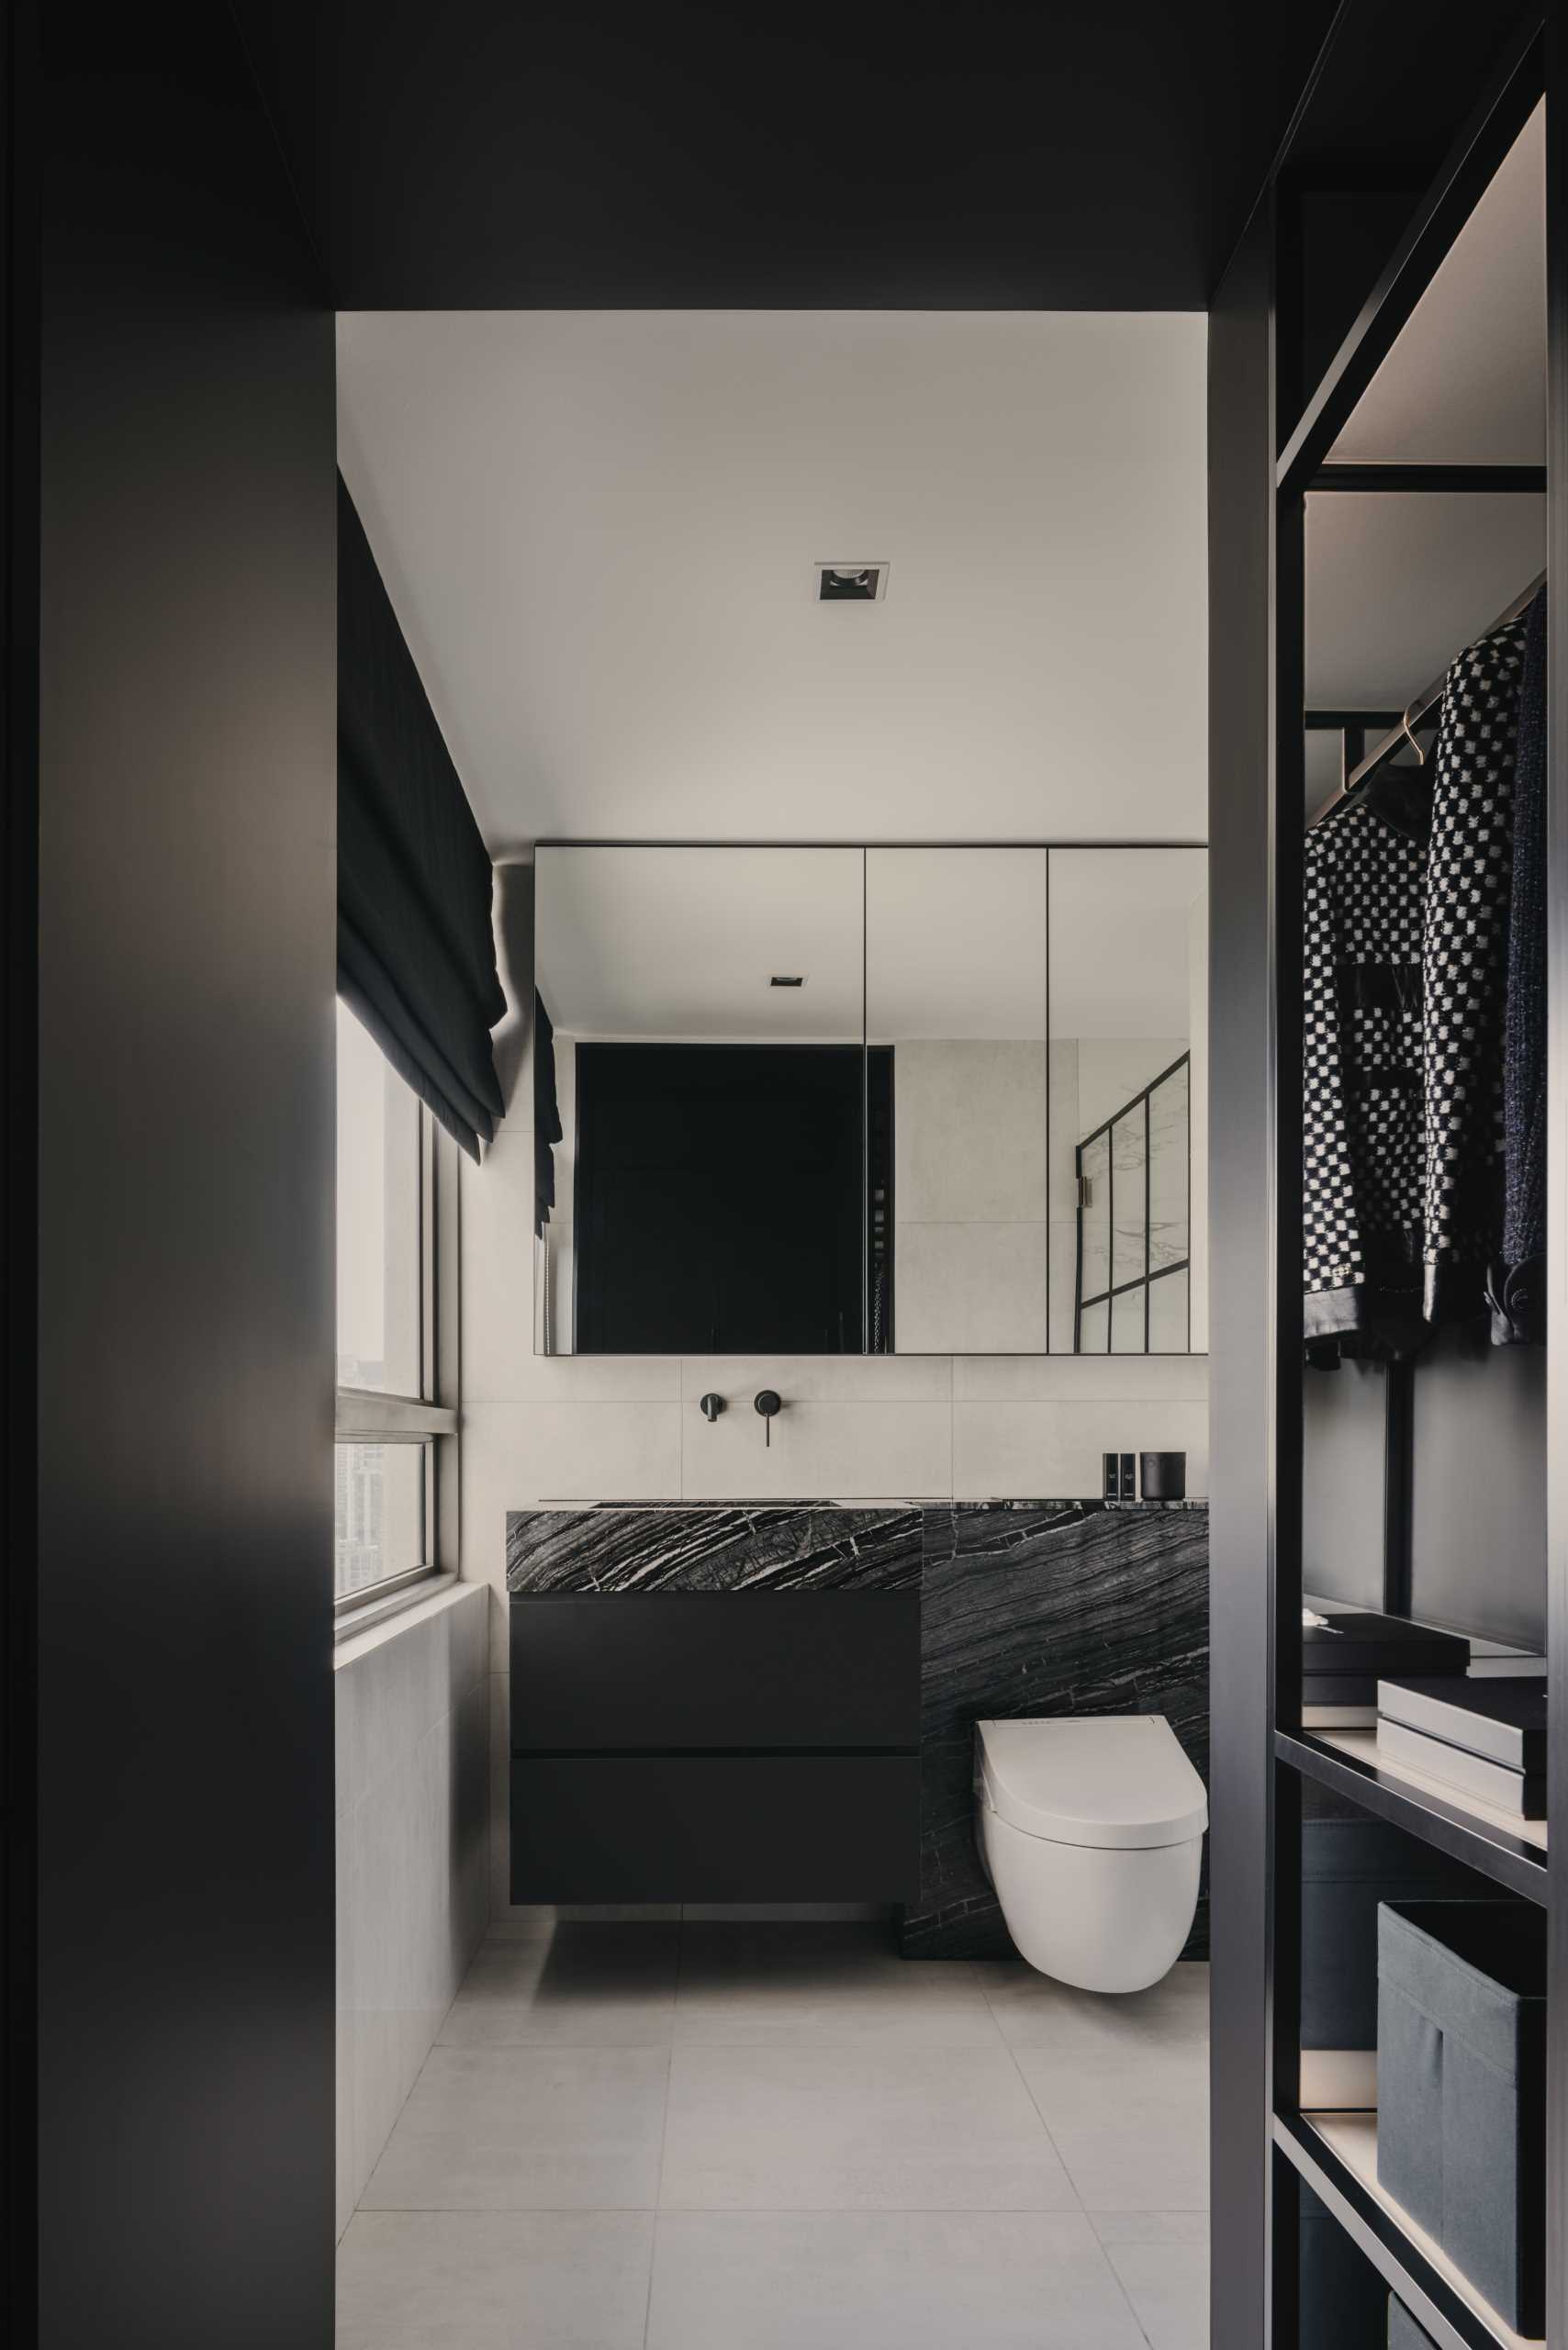 A modern bathroom with a monochrome theme, includes a black vanity, a stone countertop, and a shower with black accents.